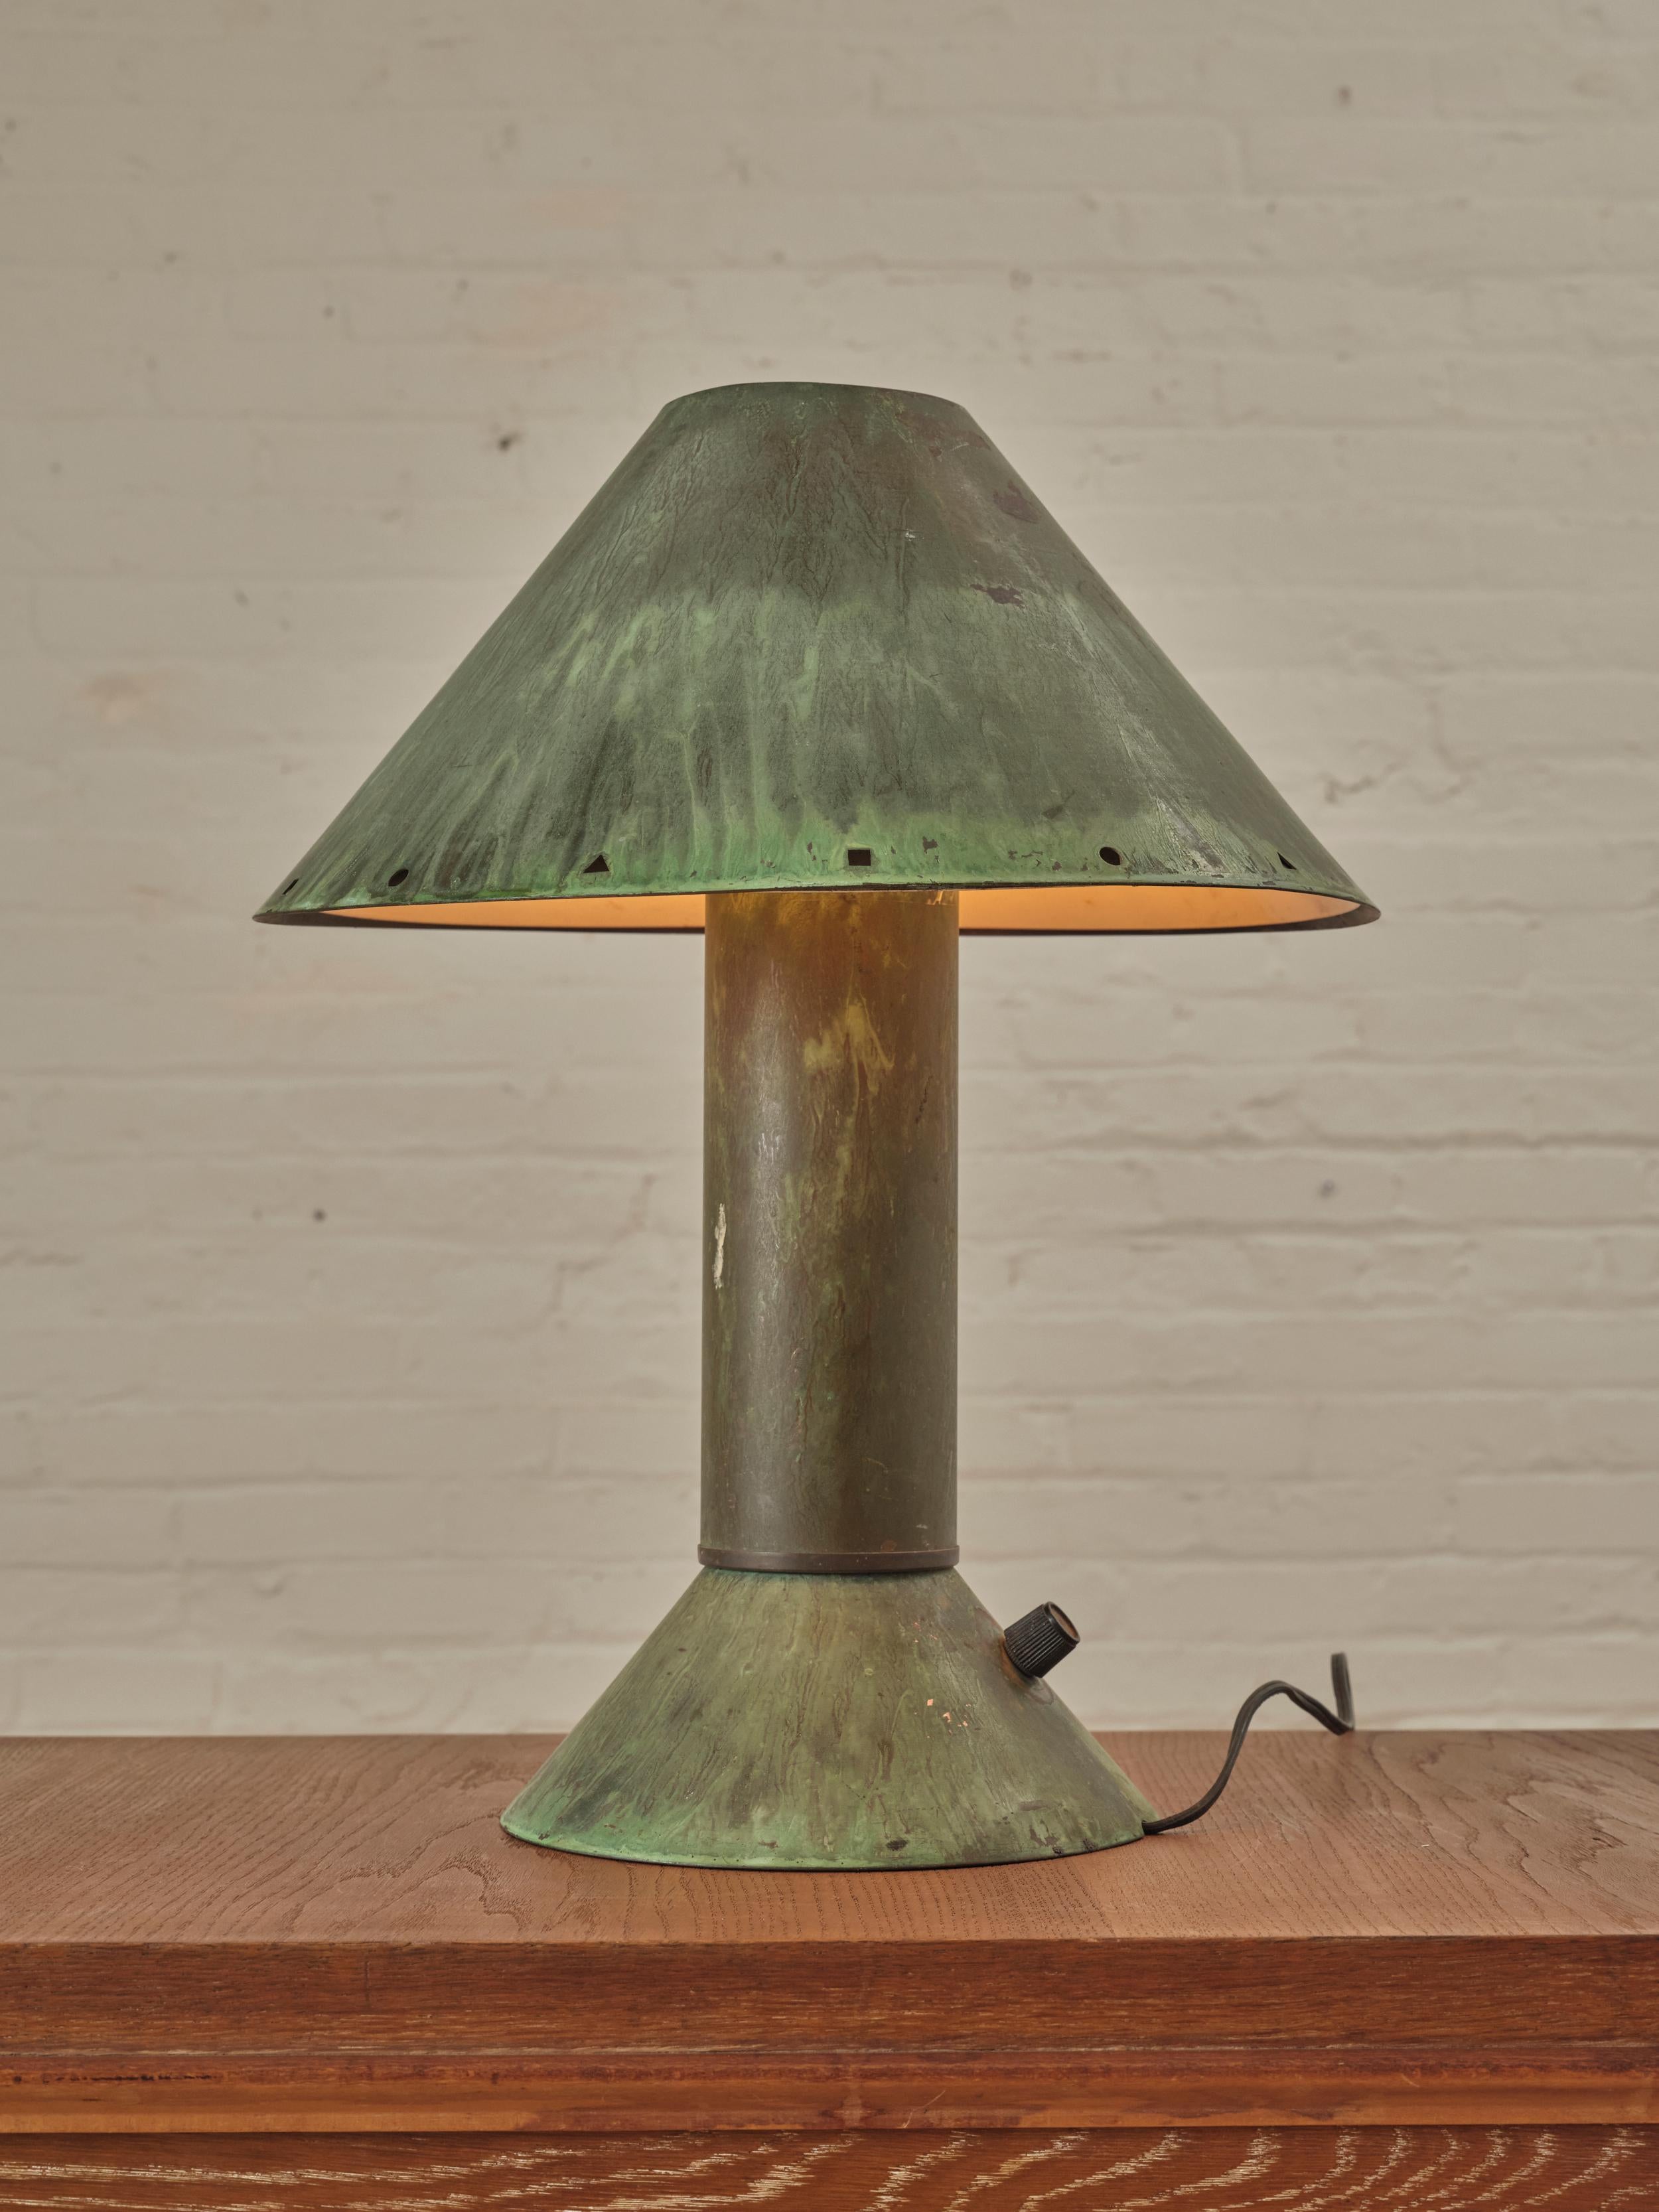 Industrial California Table Lamp by Ron Rezek. This lamp exhibits classic form and motif of the Memphis era in oxidized, patinated copper. White enamel reflector shade attaches to base, outer copper shade rests on top making the shade